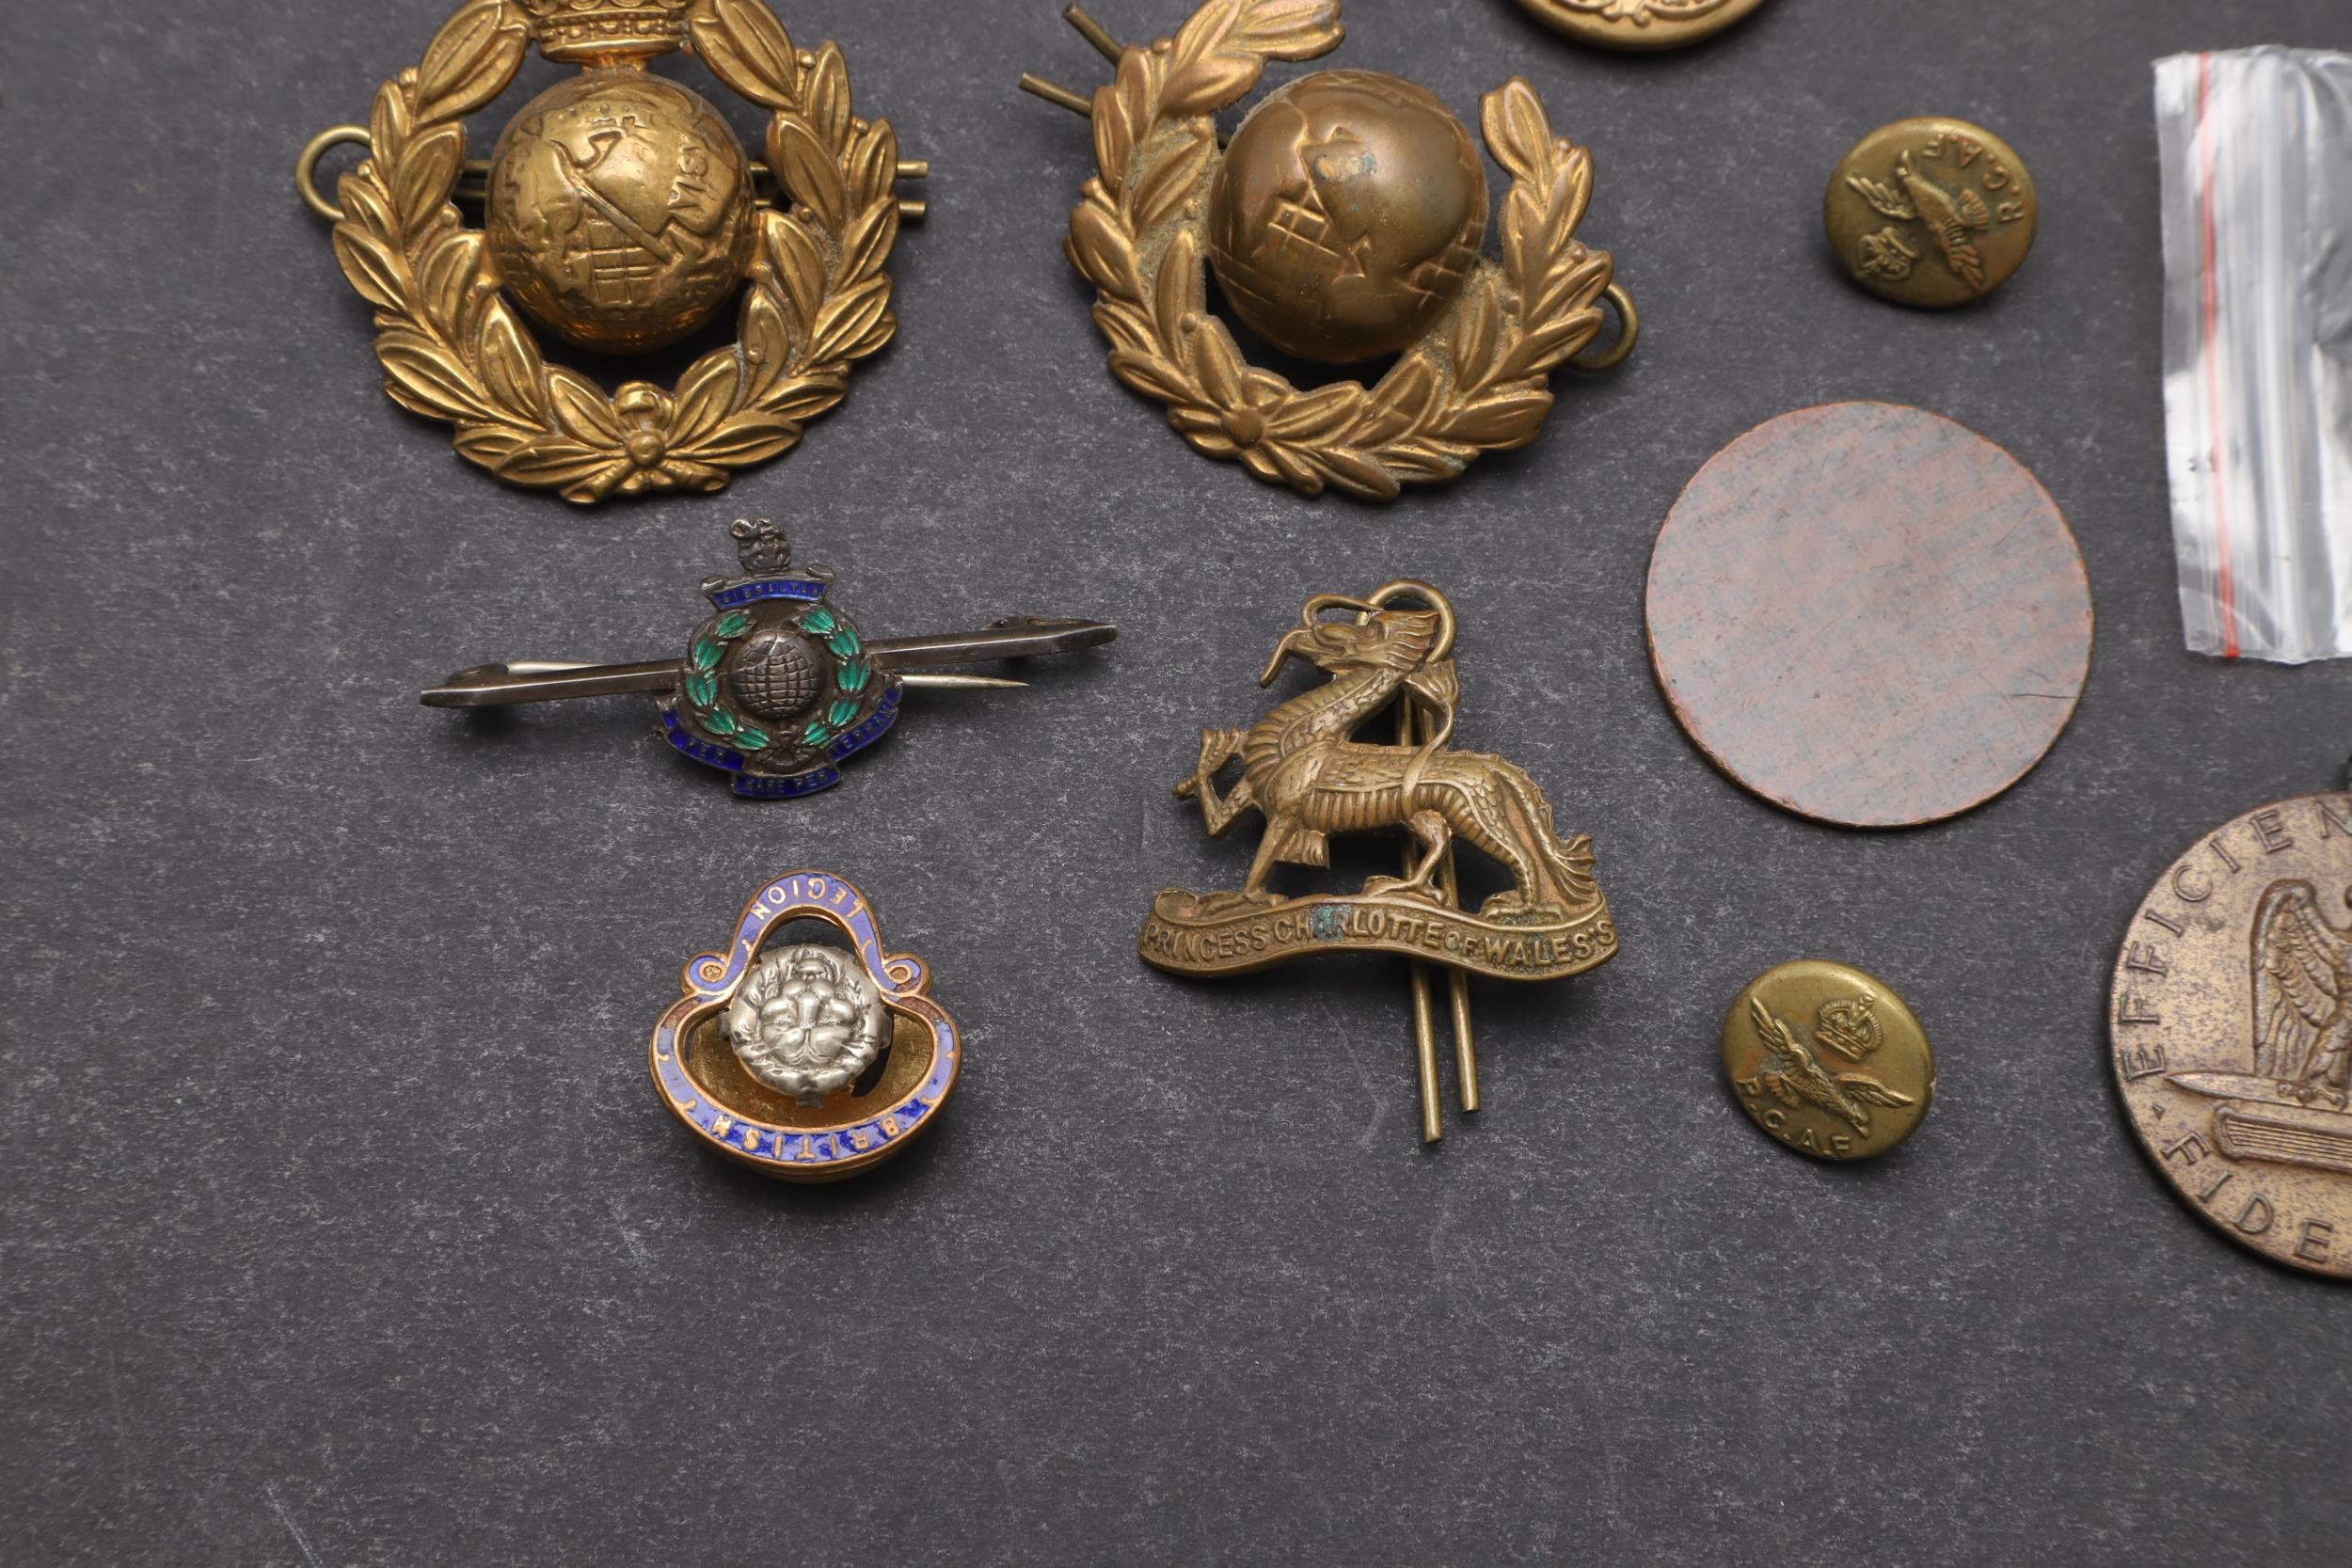 AN INTERESTING COLLECTION OF MILITARY BADGES, BUTTONS AND INSIGNIA. - Image 6 of 9